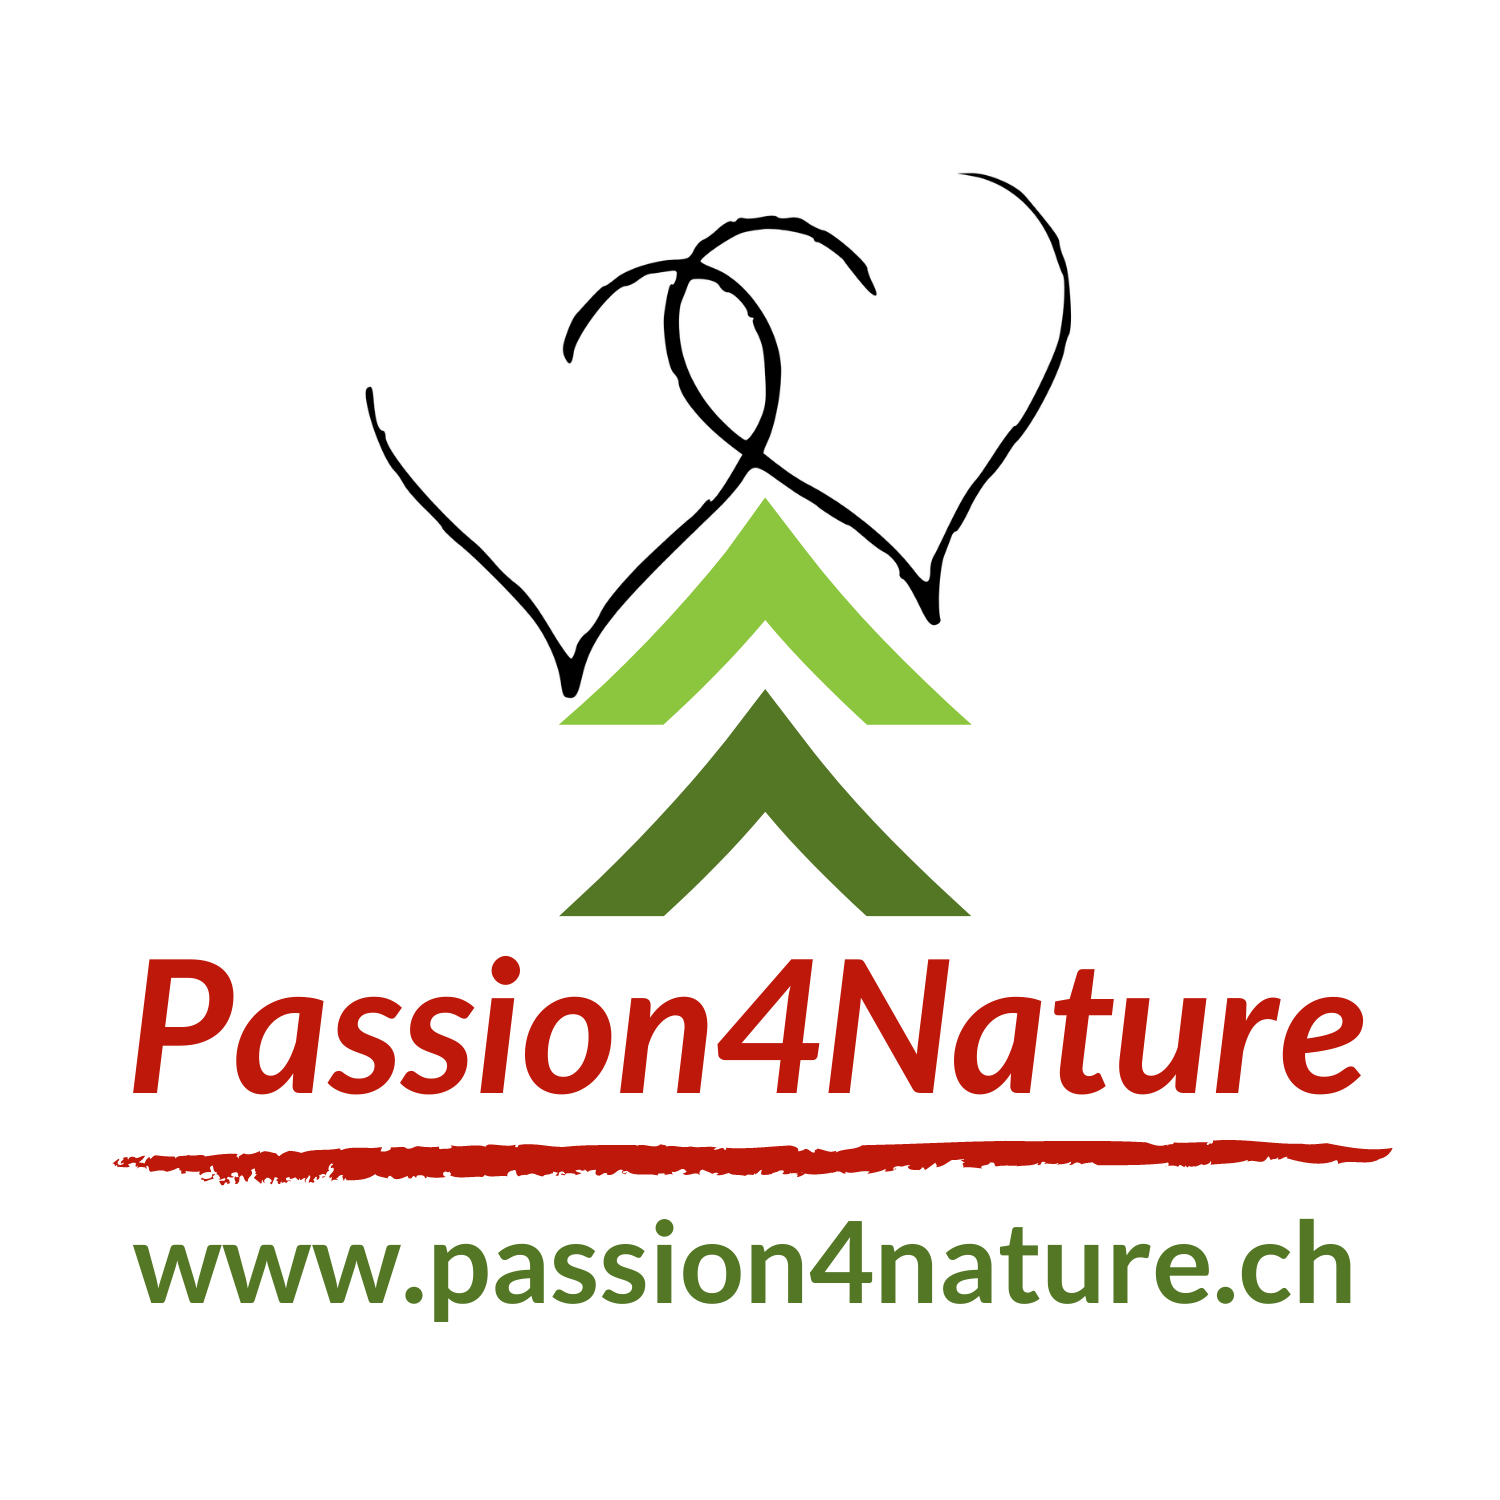 WHO ARE ? - Passion4nature